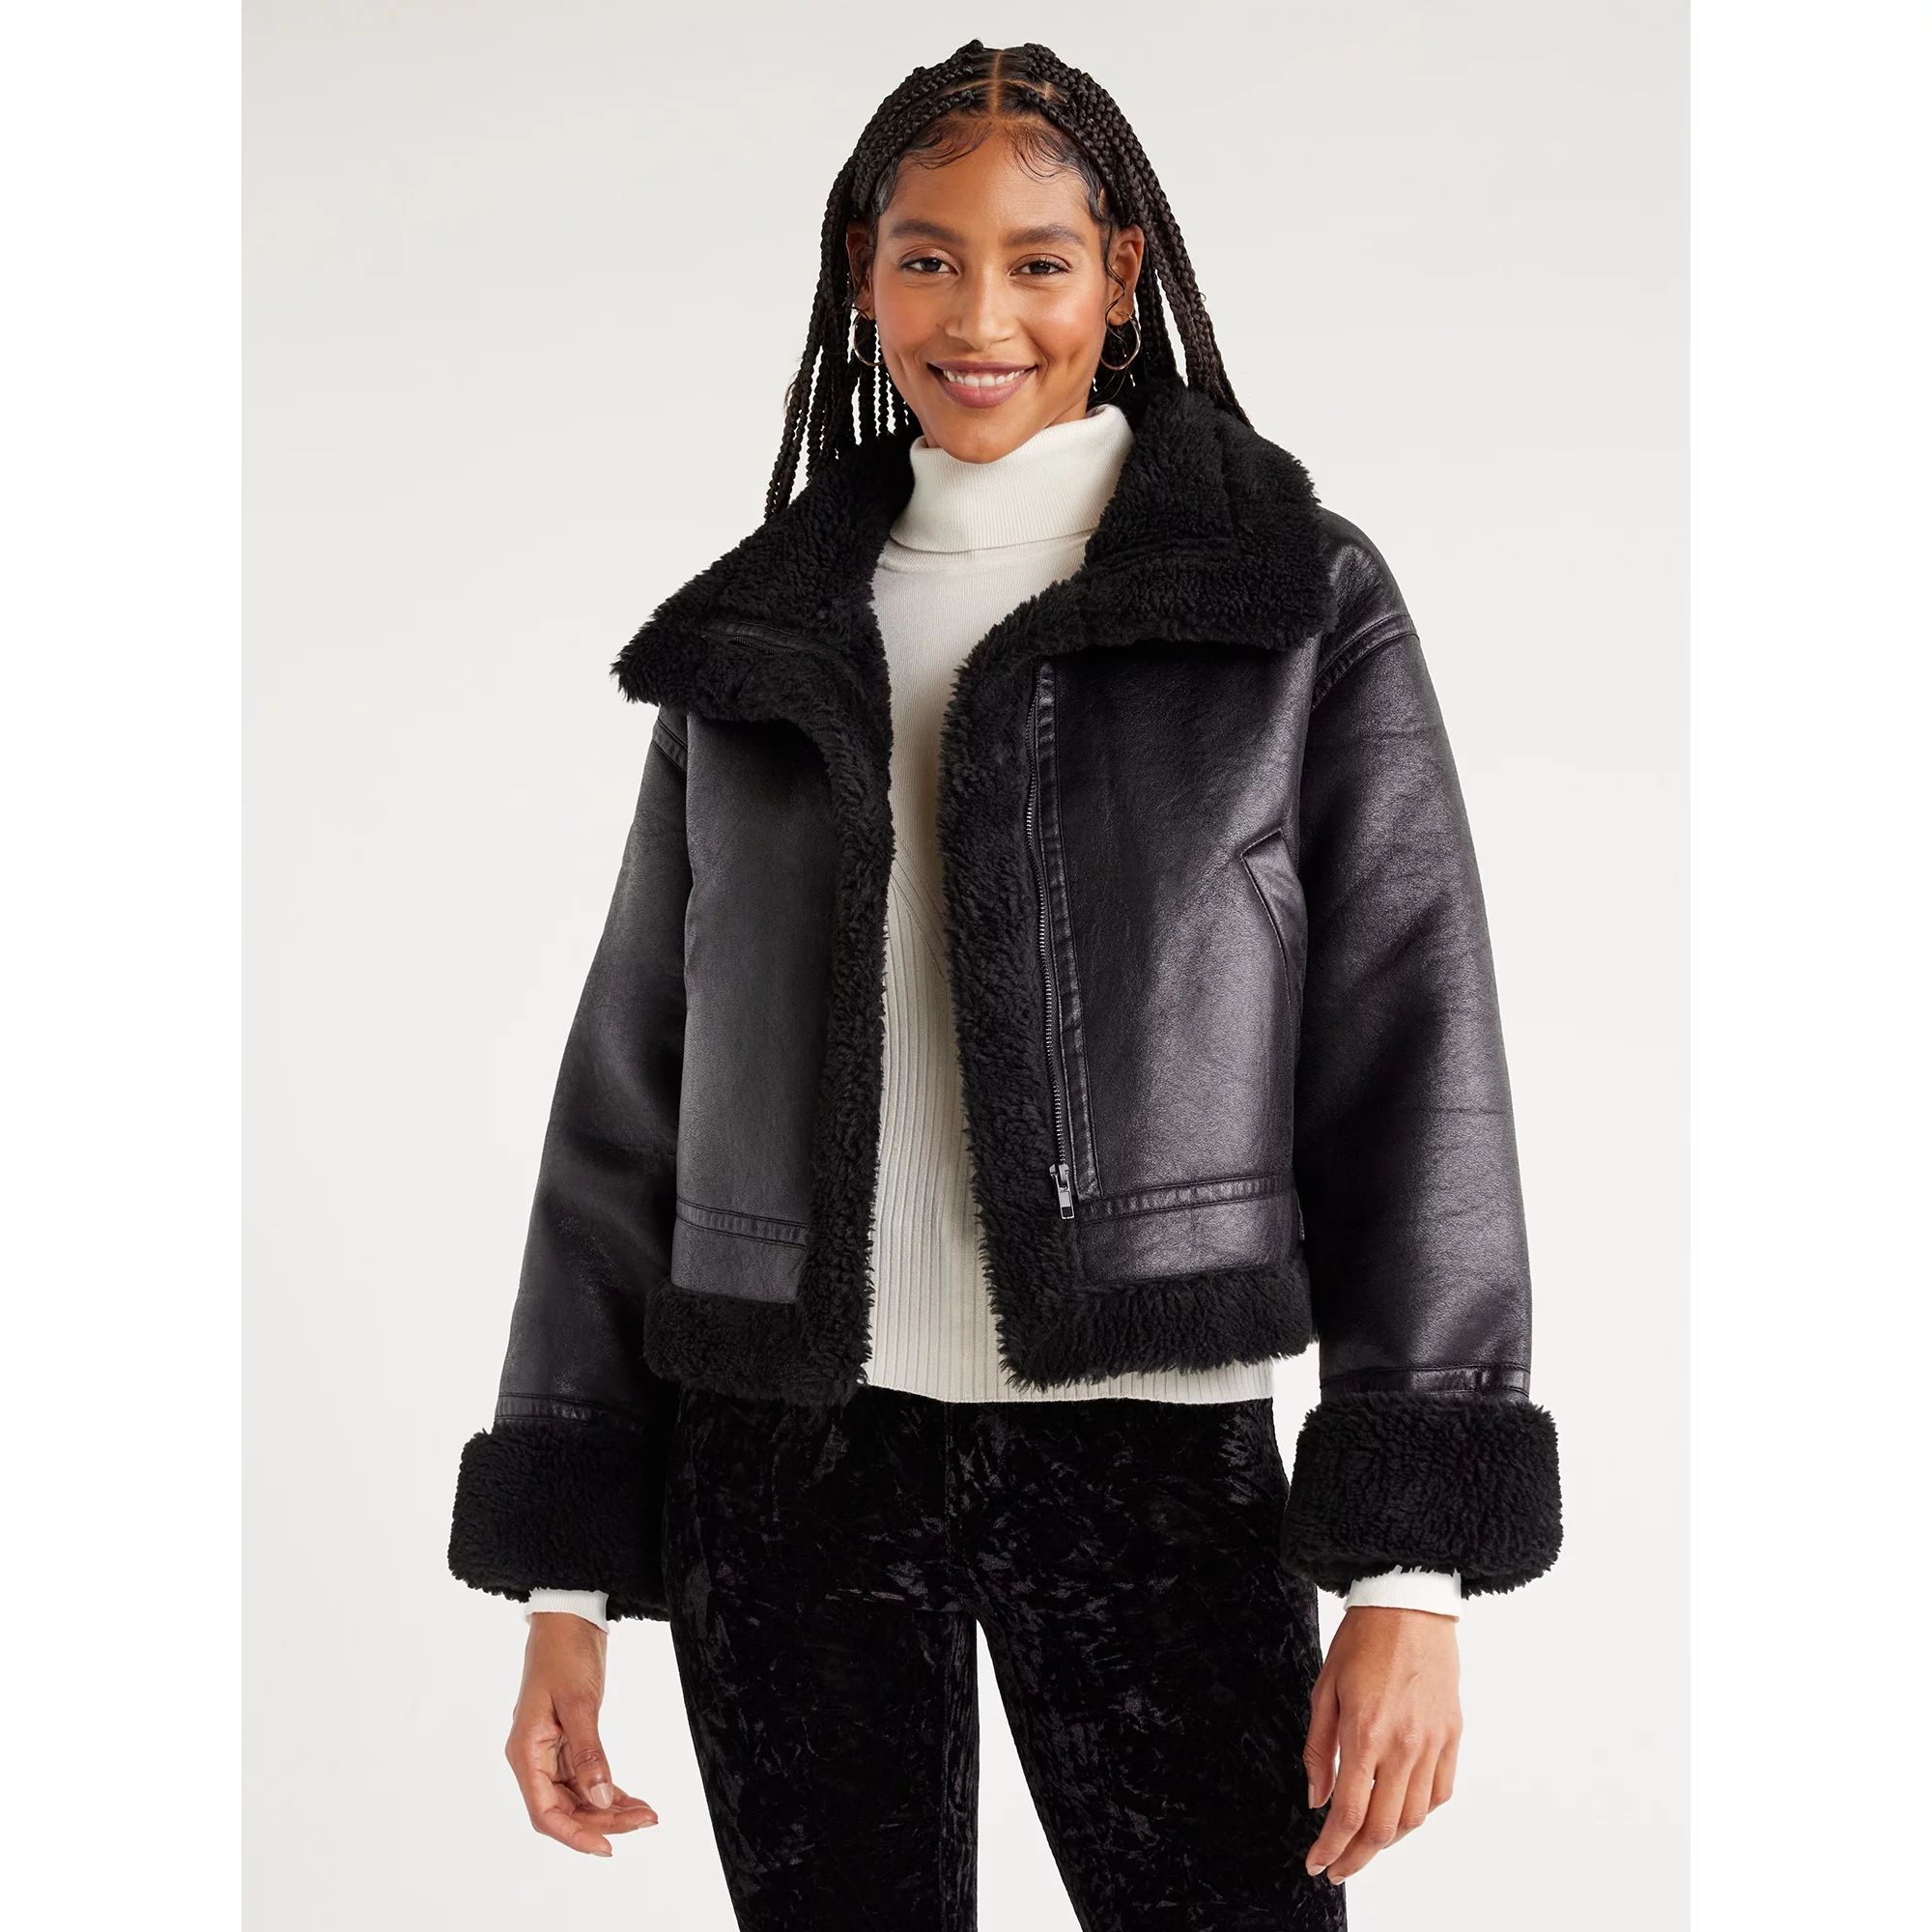 Scoop Women's Faux Suede Cropped Bomber Jacket with Faux Sherpa Lining, Sizes XS-XXL | Walmart (US)